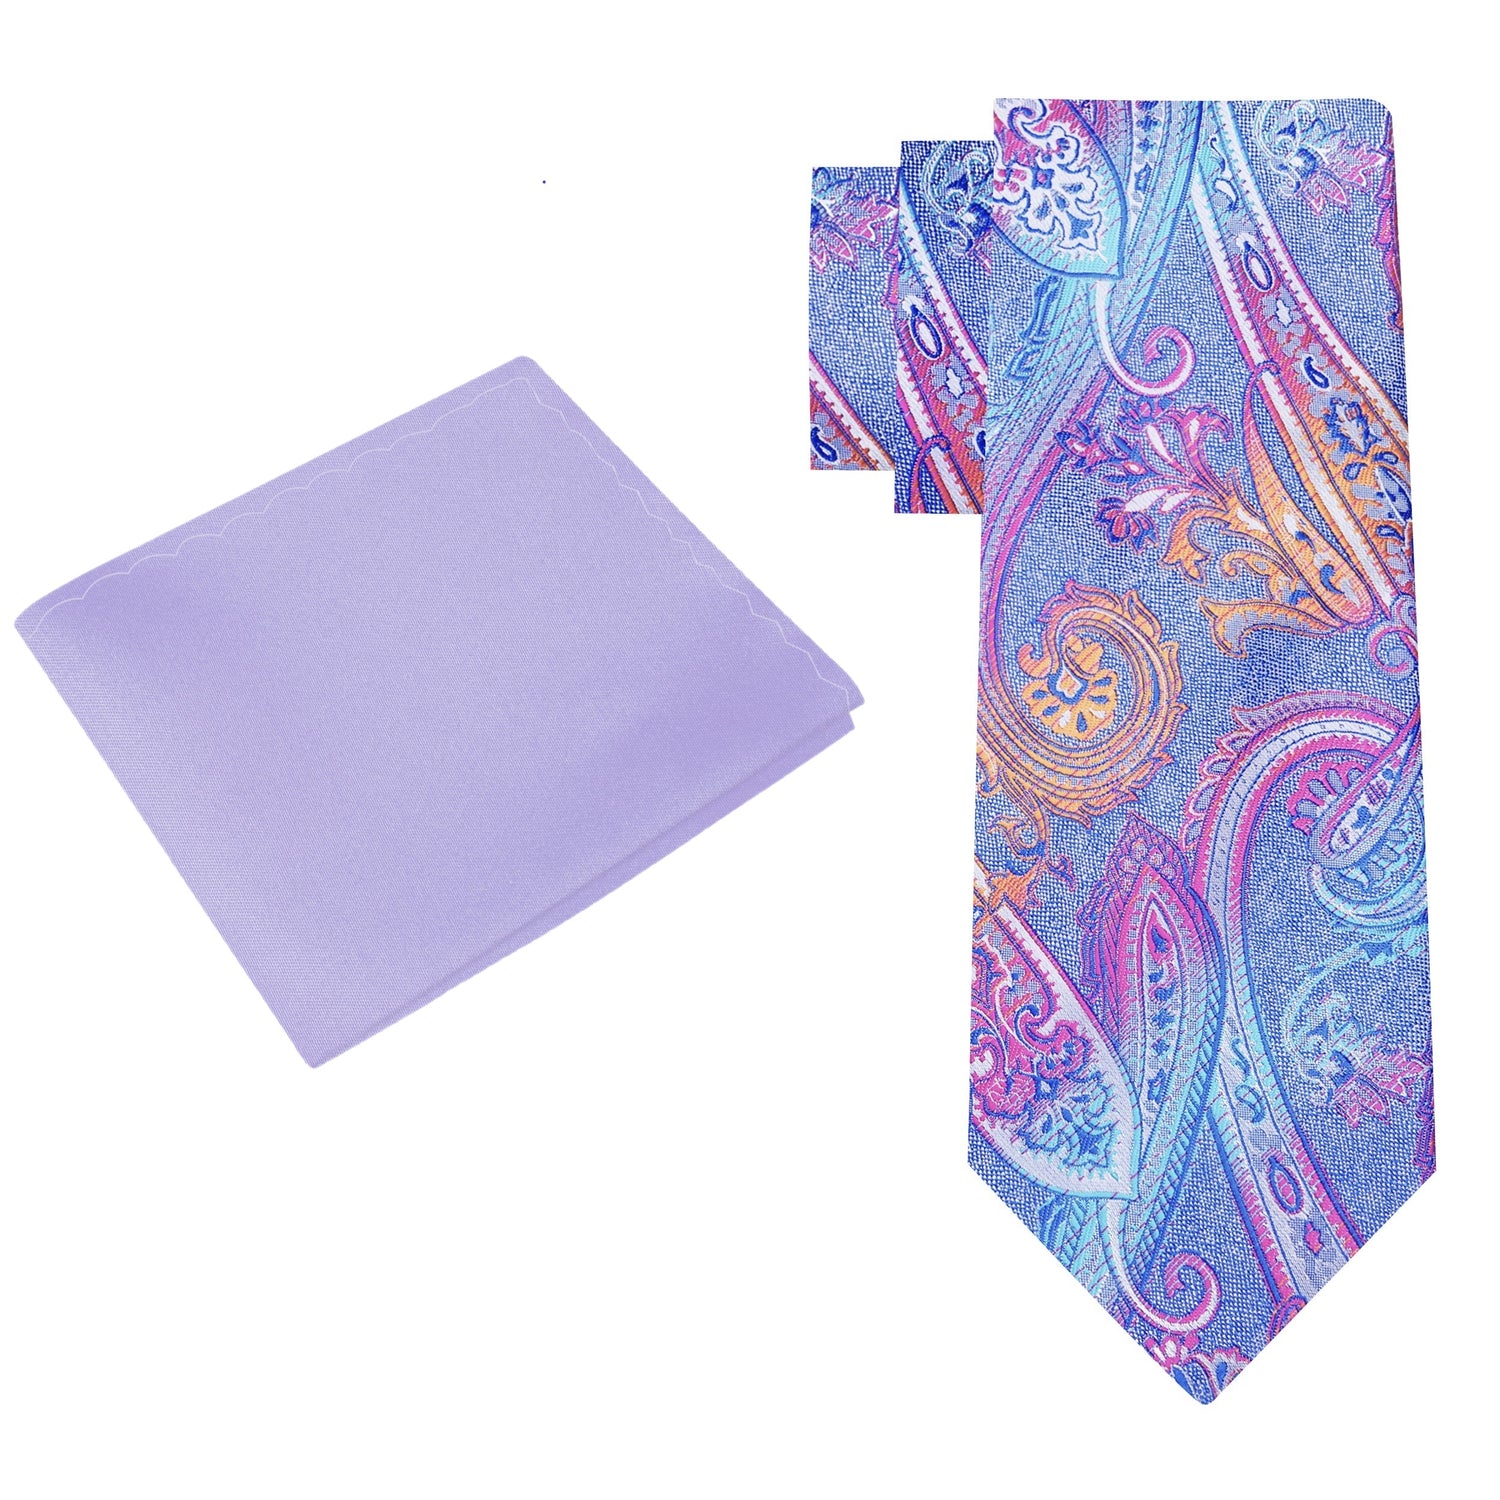 Alt View: Blue, Pink Orange Paisley Silk Tie and Accenting Light Purple Pocket Square